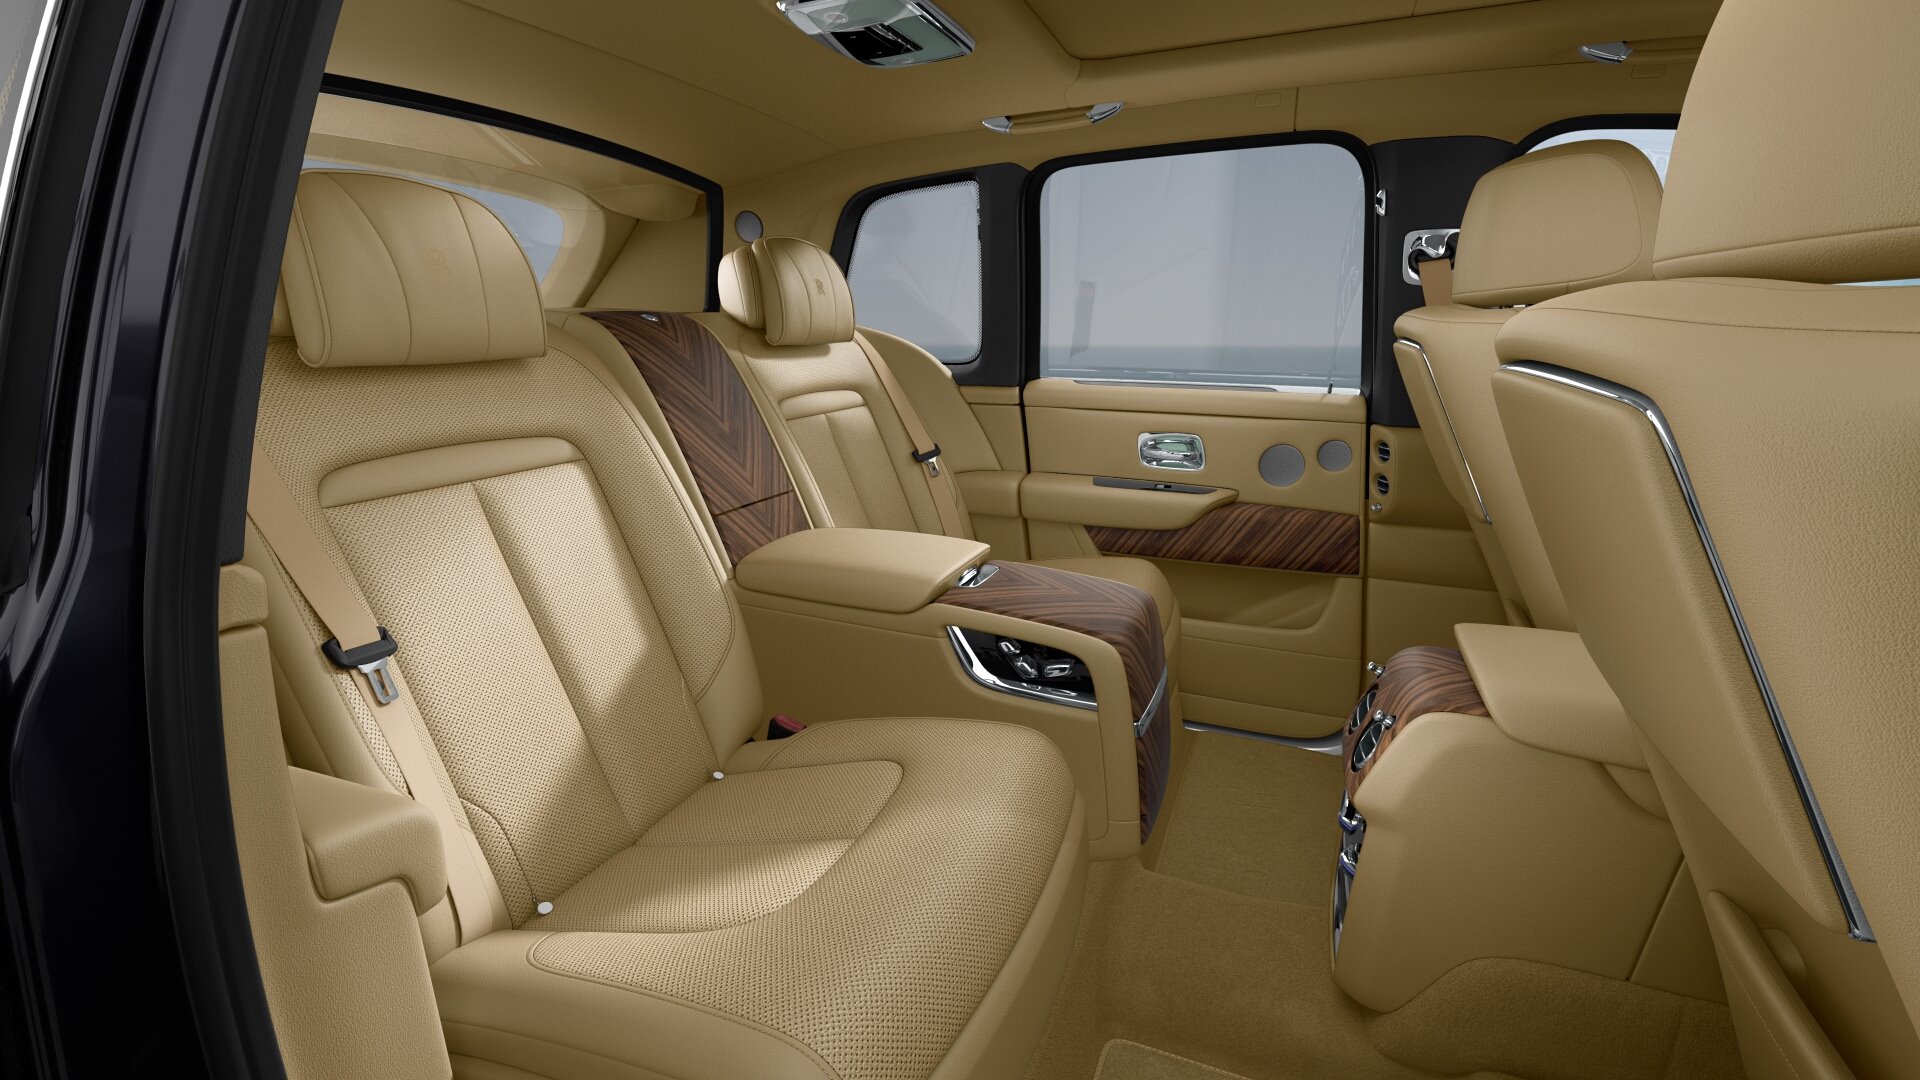 Rolls Royce Cullinan by MANSORY 2020  Interior and Exterior Details  Rolls  royce cullinan Rolls royce Royce